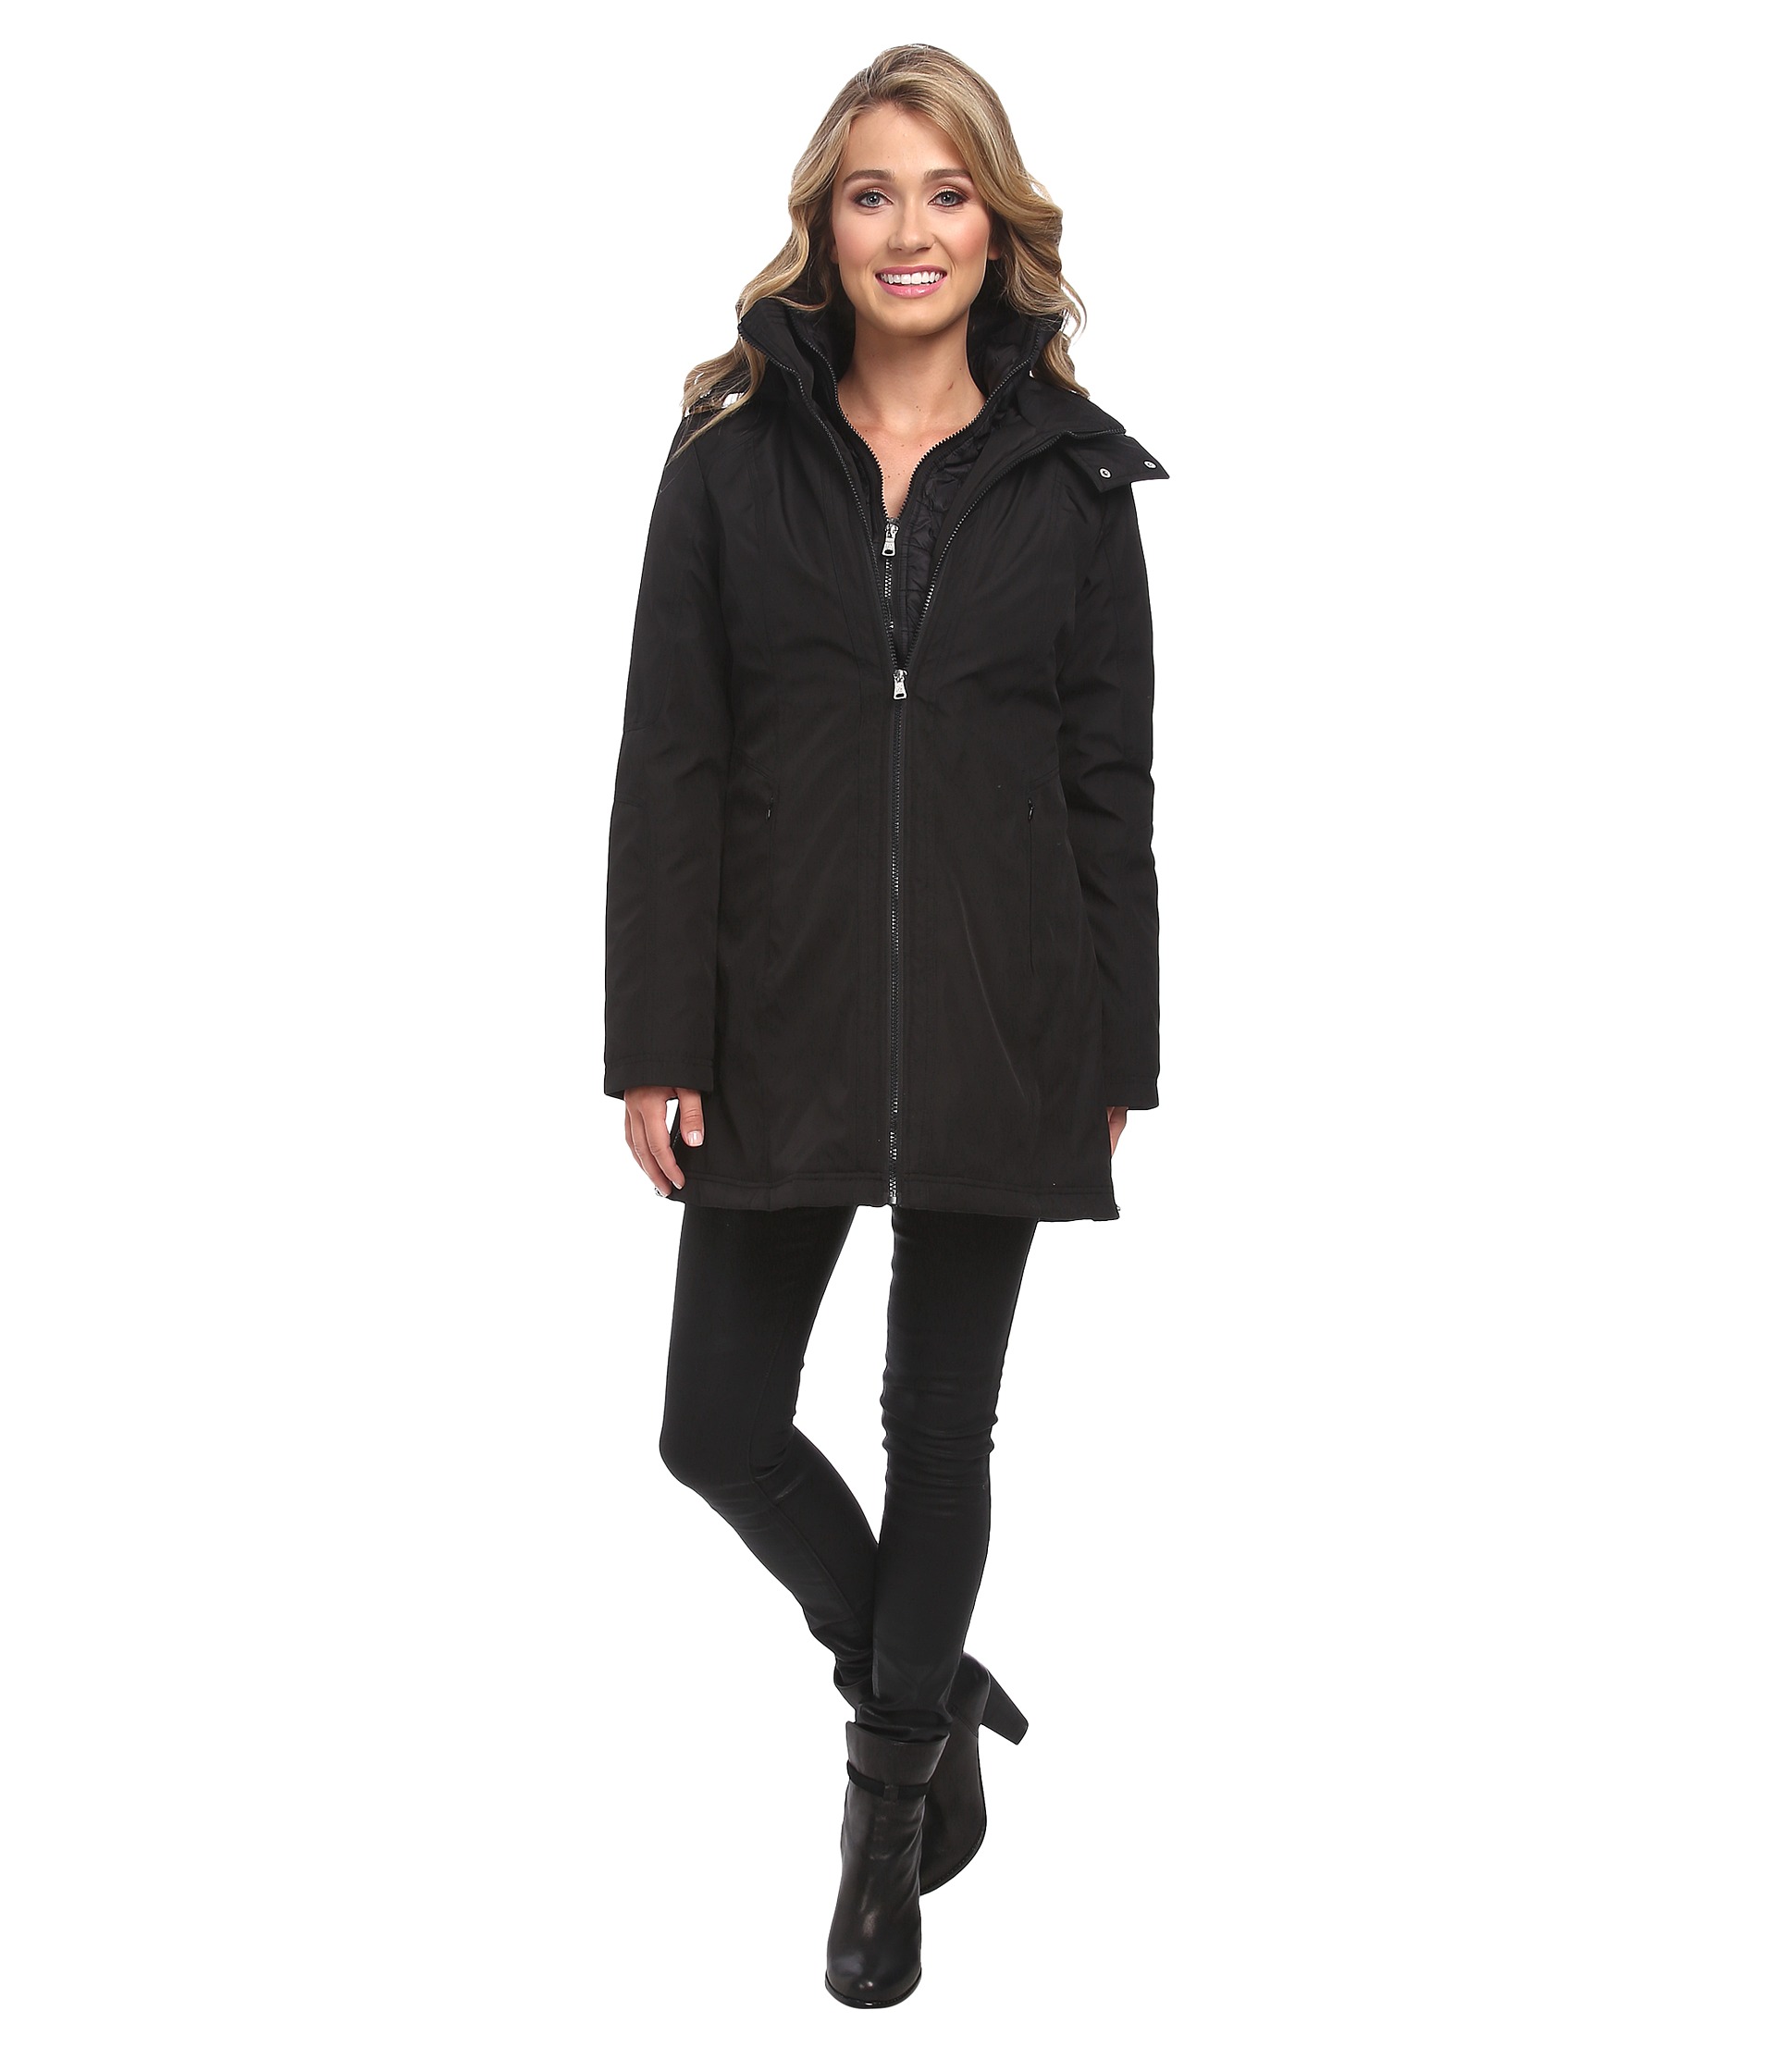 Jessica Simpson Jofmp741 Coat, Clothing, Women | Shipped Free at Zappos